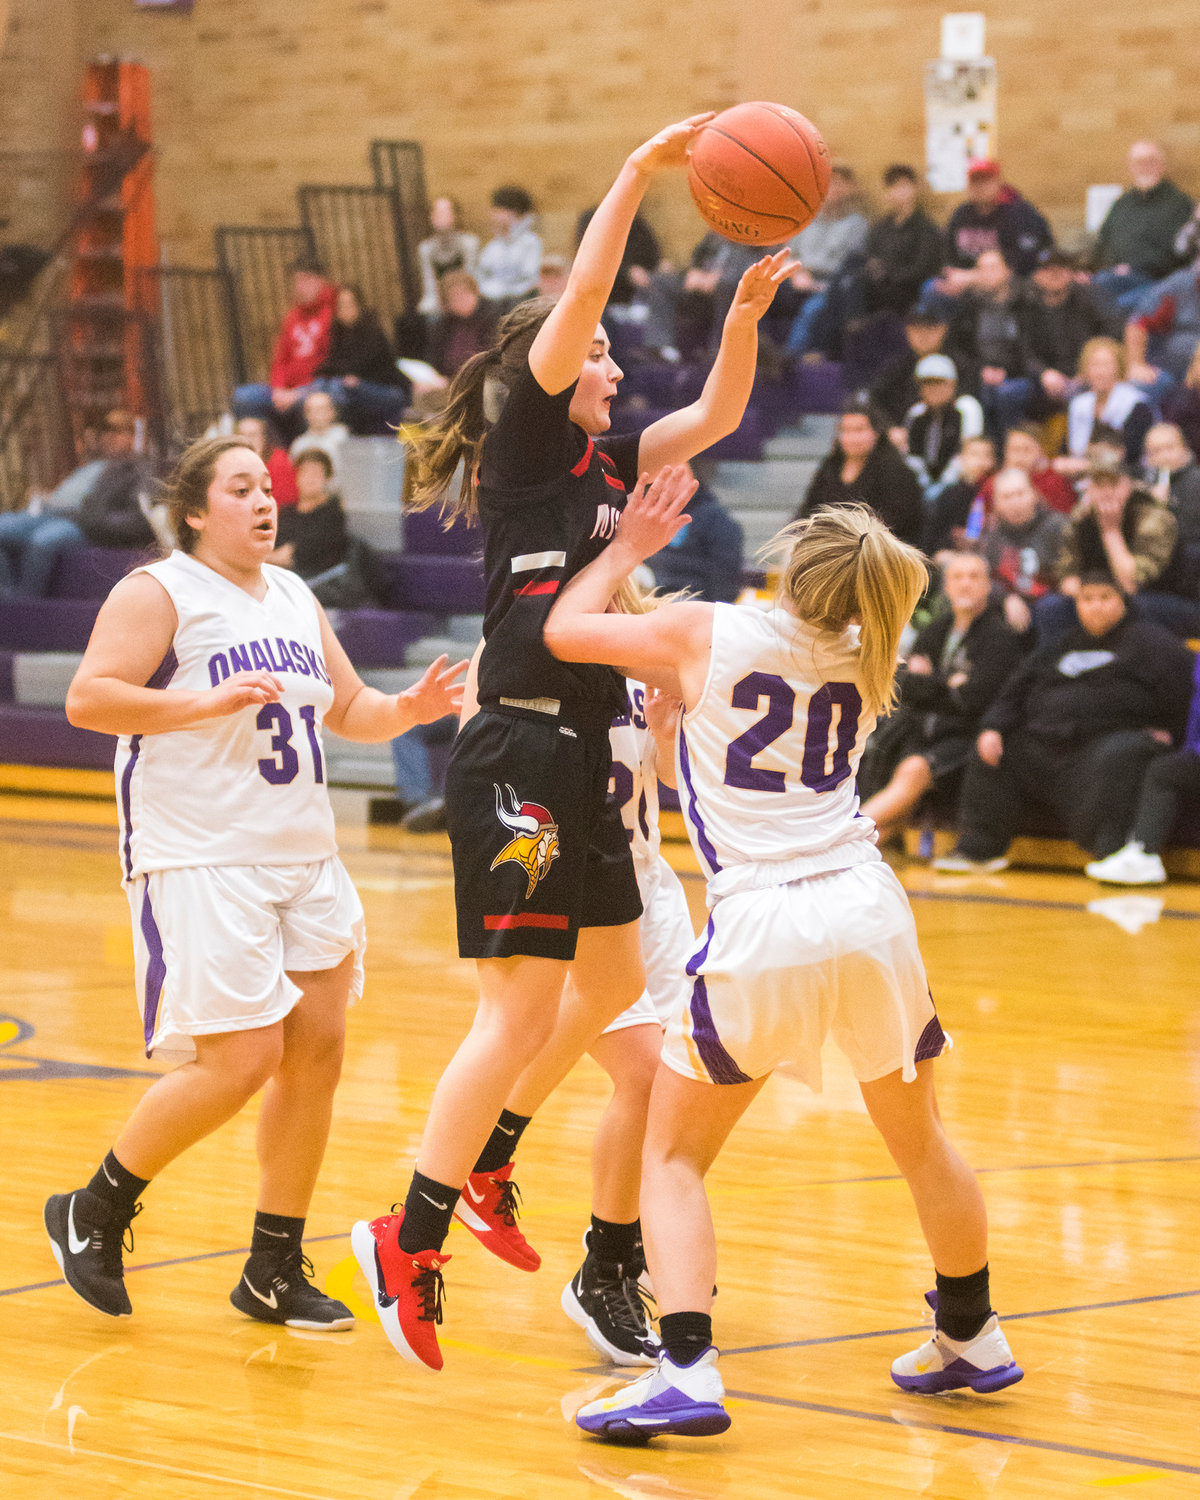 Images from a Central 2B girls basketball game between Onalaska and Mossyrock played Thursday night in Onalaska.